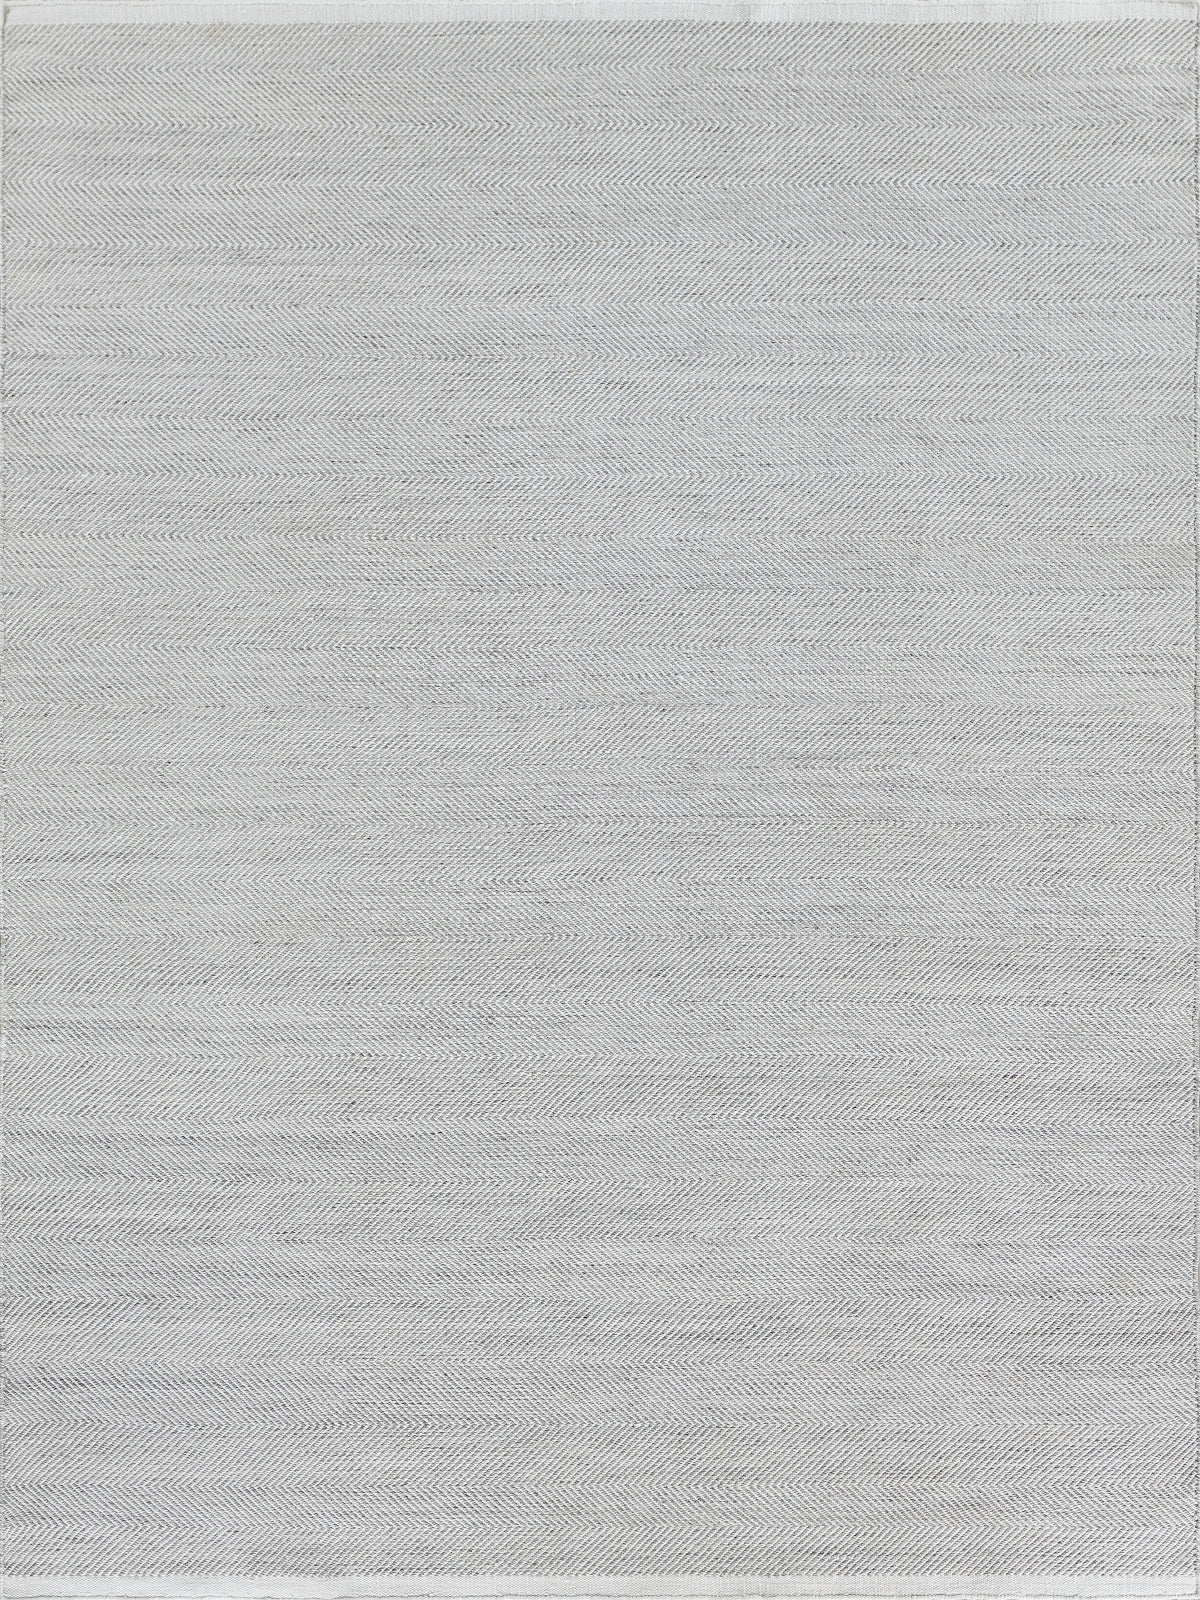 Exquisite Rugs Bintan 4896 Ivory/Silver Area Rug